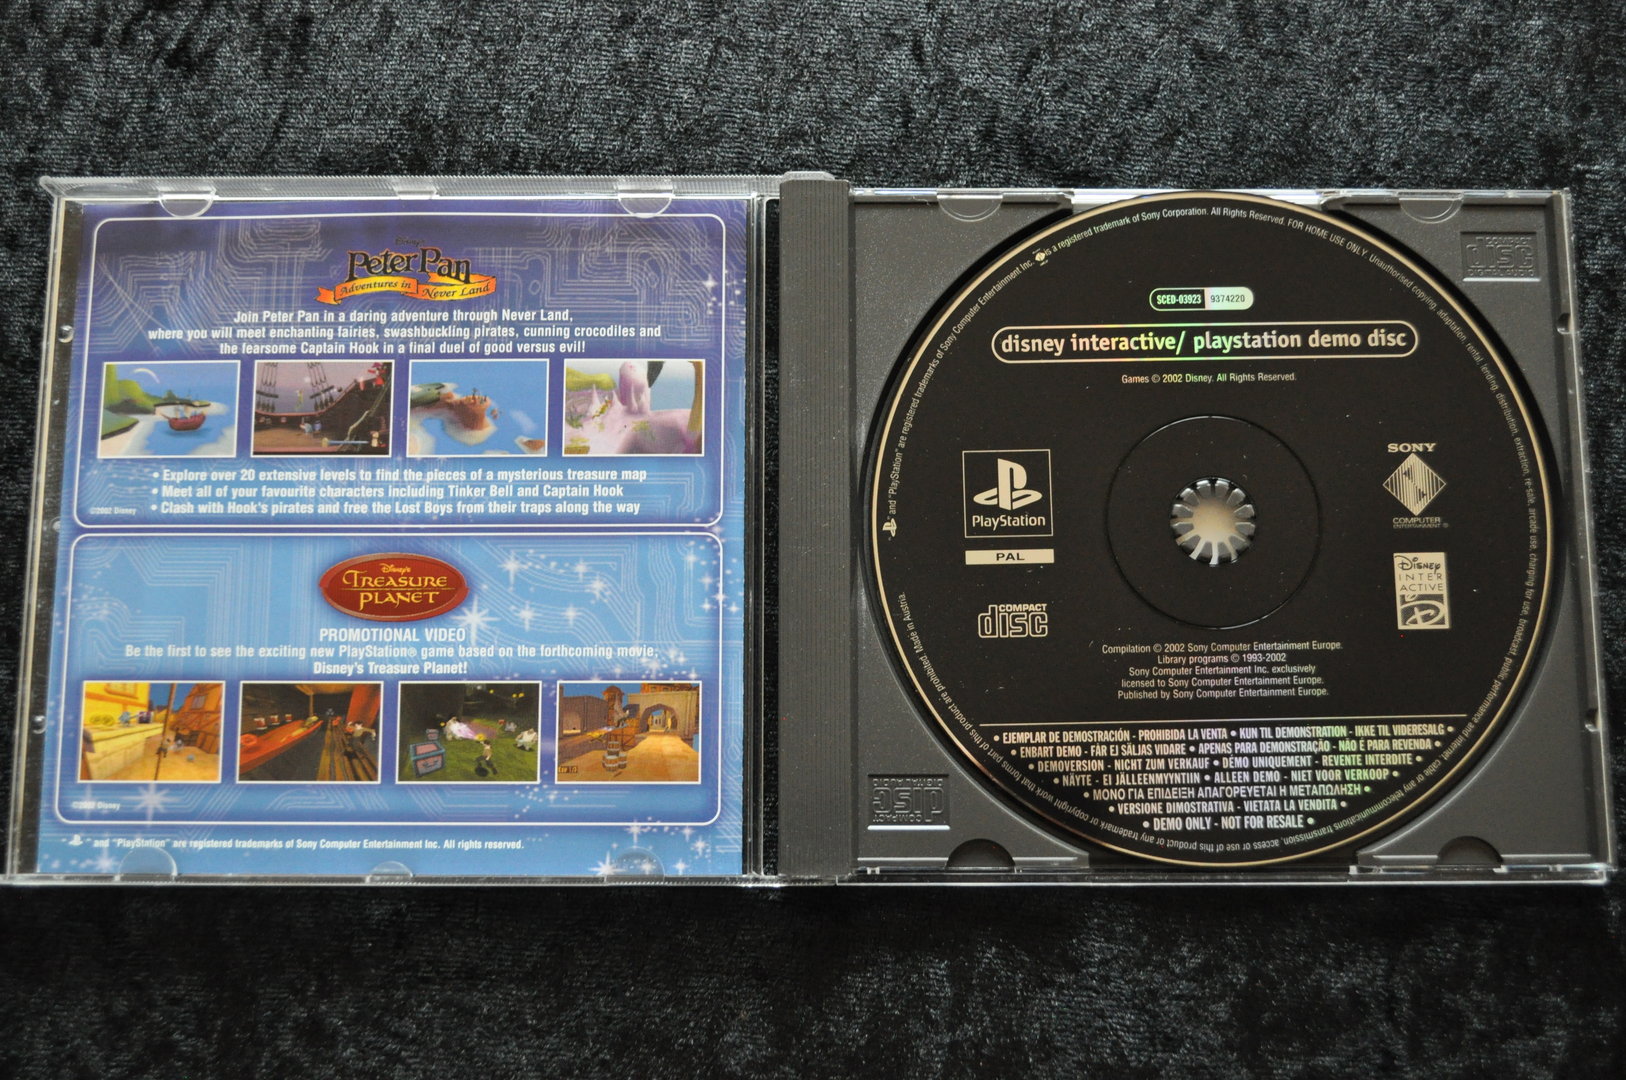 praktisk Forudsige Hård ring Experience The Magic Of Disney On Playstation Demo Disc Playstation 1 PS1 -  Retrogameking.com | Retro,Games,Consoles,Collectables